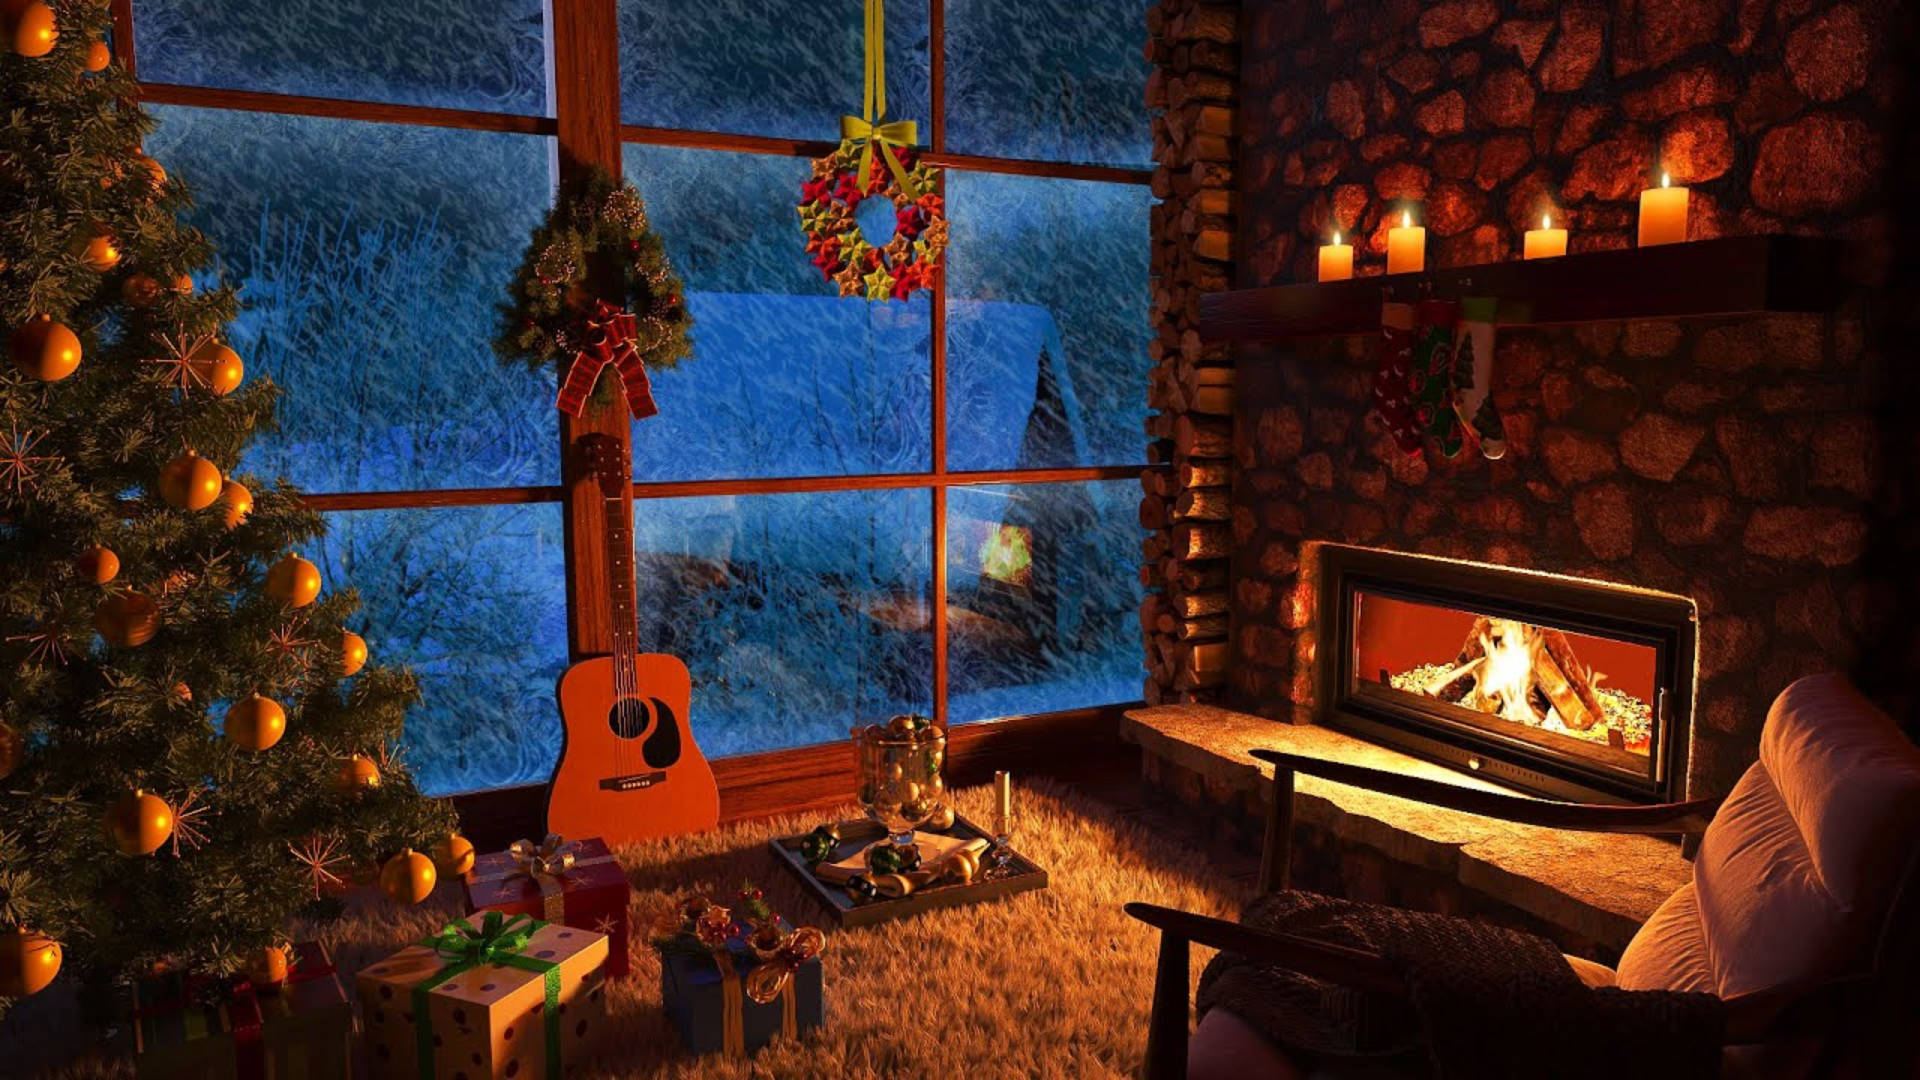 Cozy Winter Evening By The Warm Fireplace Wallpaper